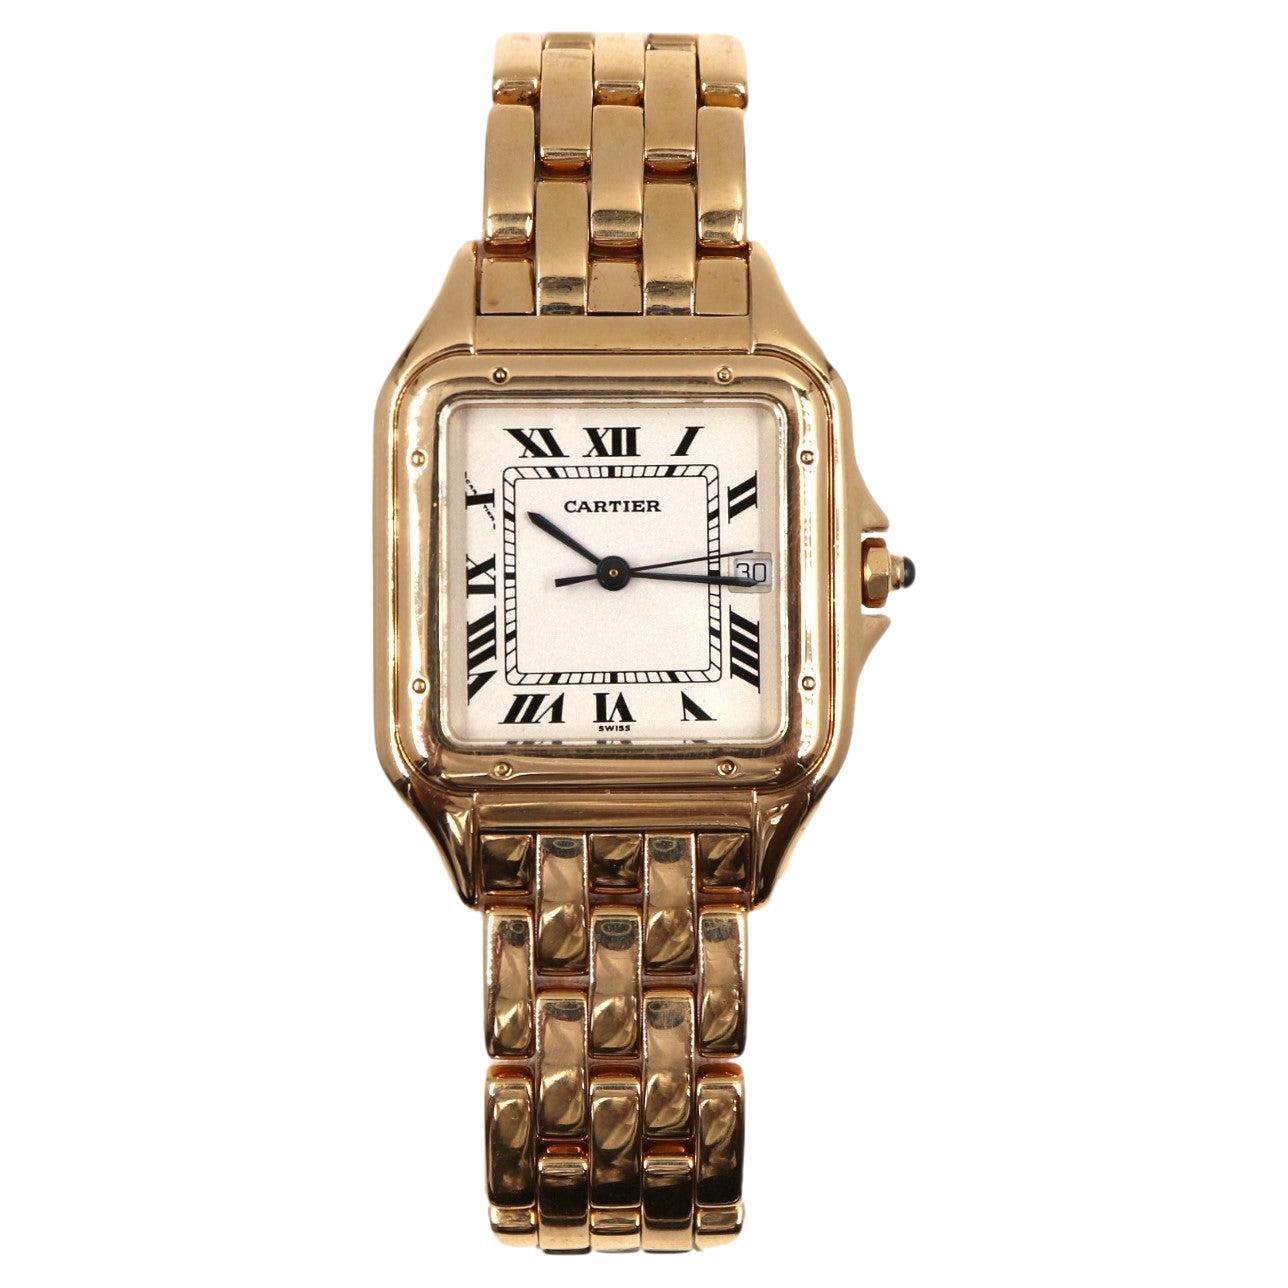 Bud Fox Wall Street Pre-Owned Coveted Cartier Large Panthere Watch 18K Gold 27mm For Sale